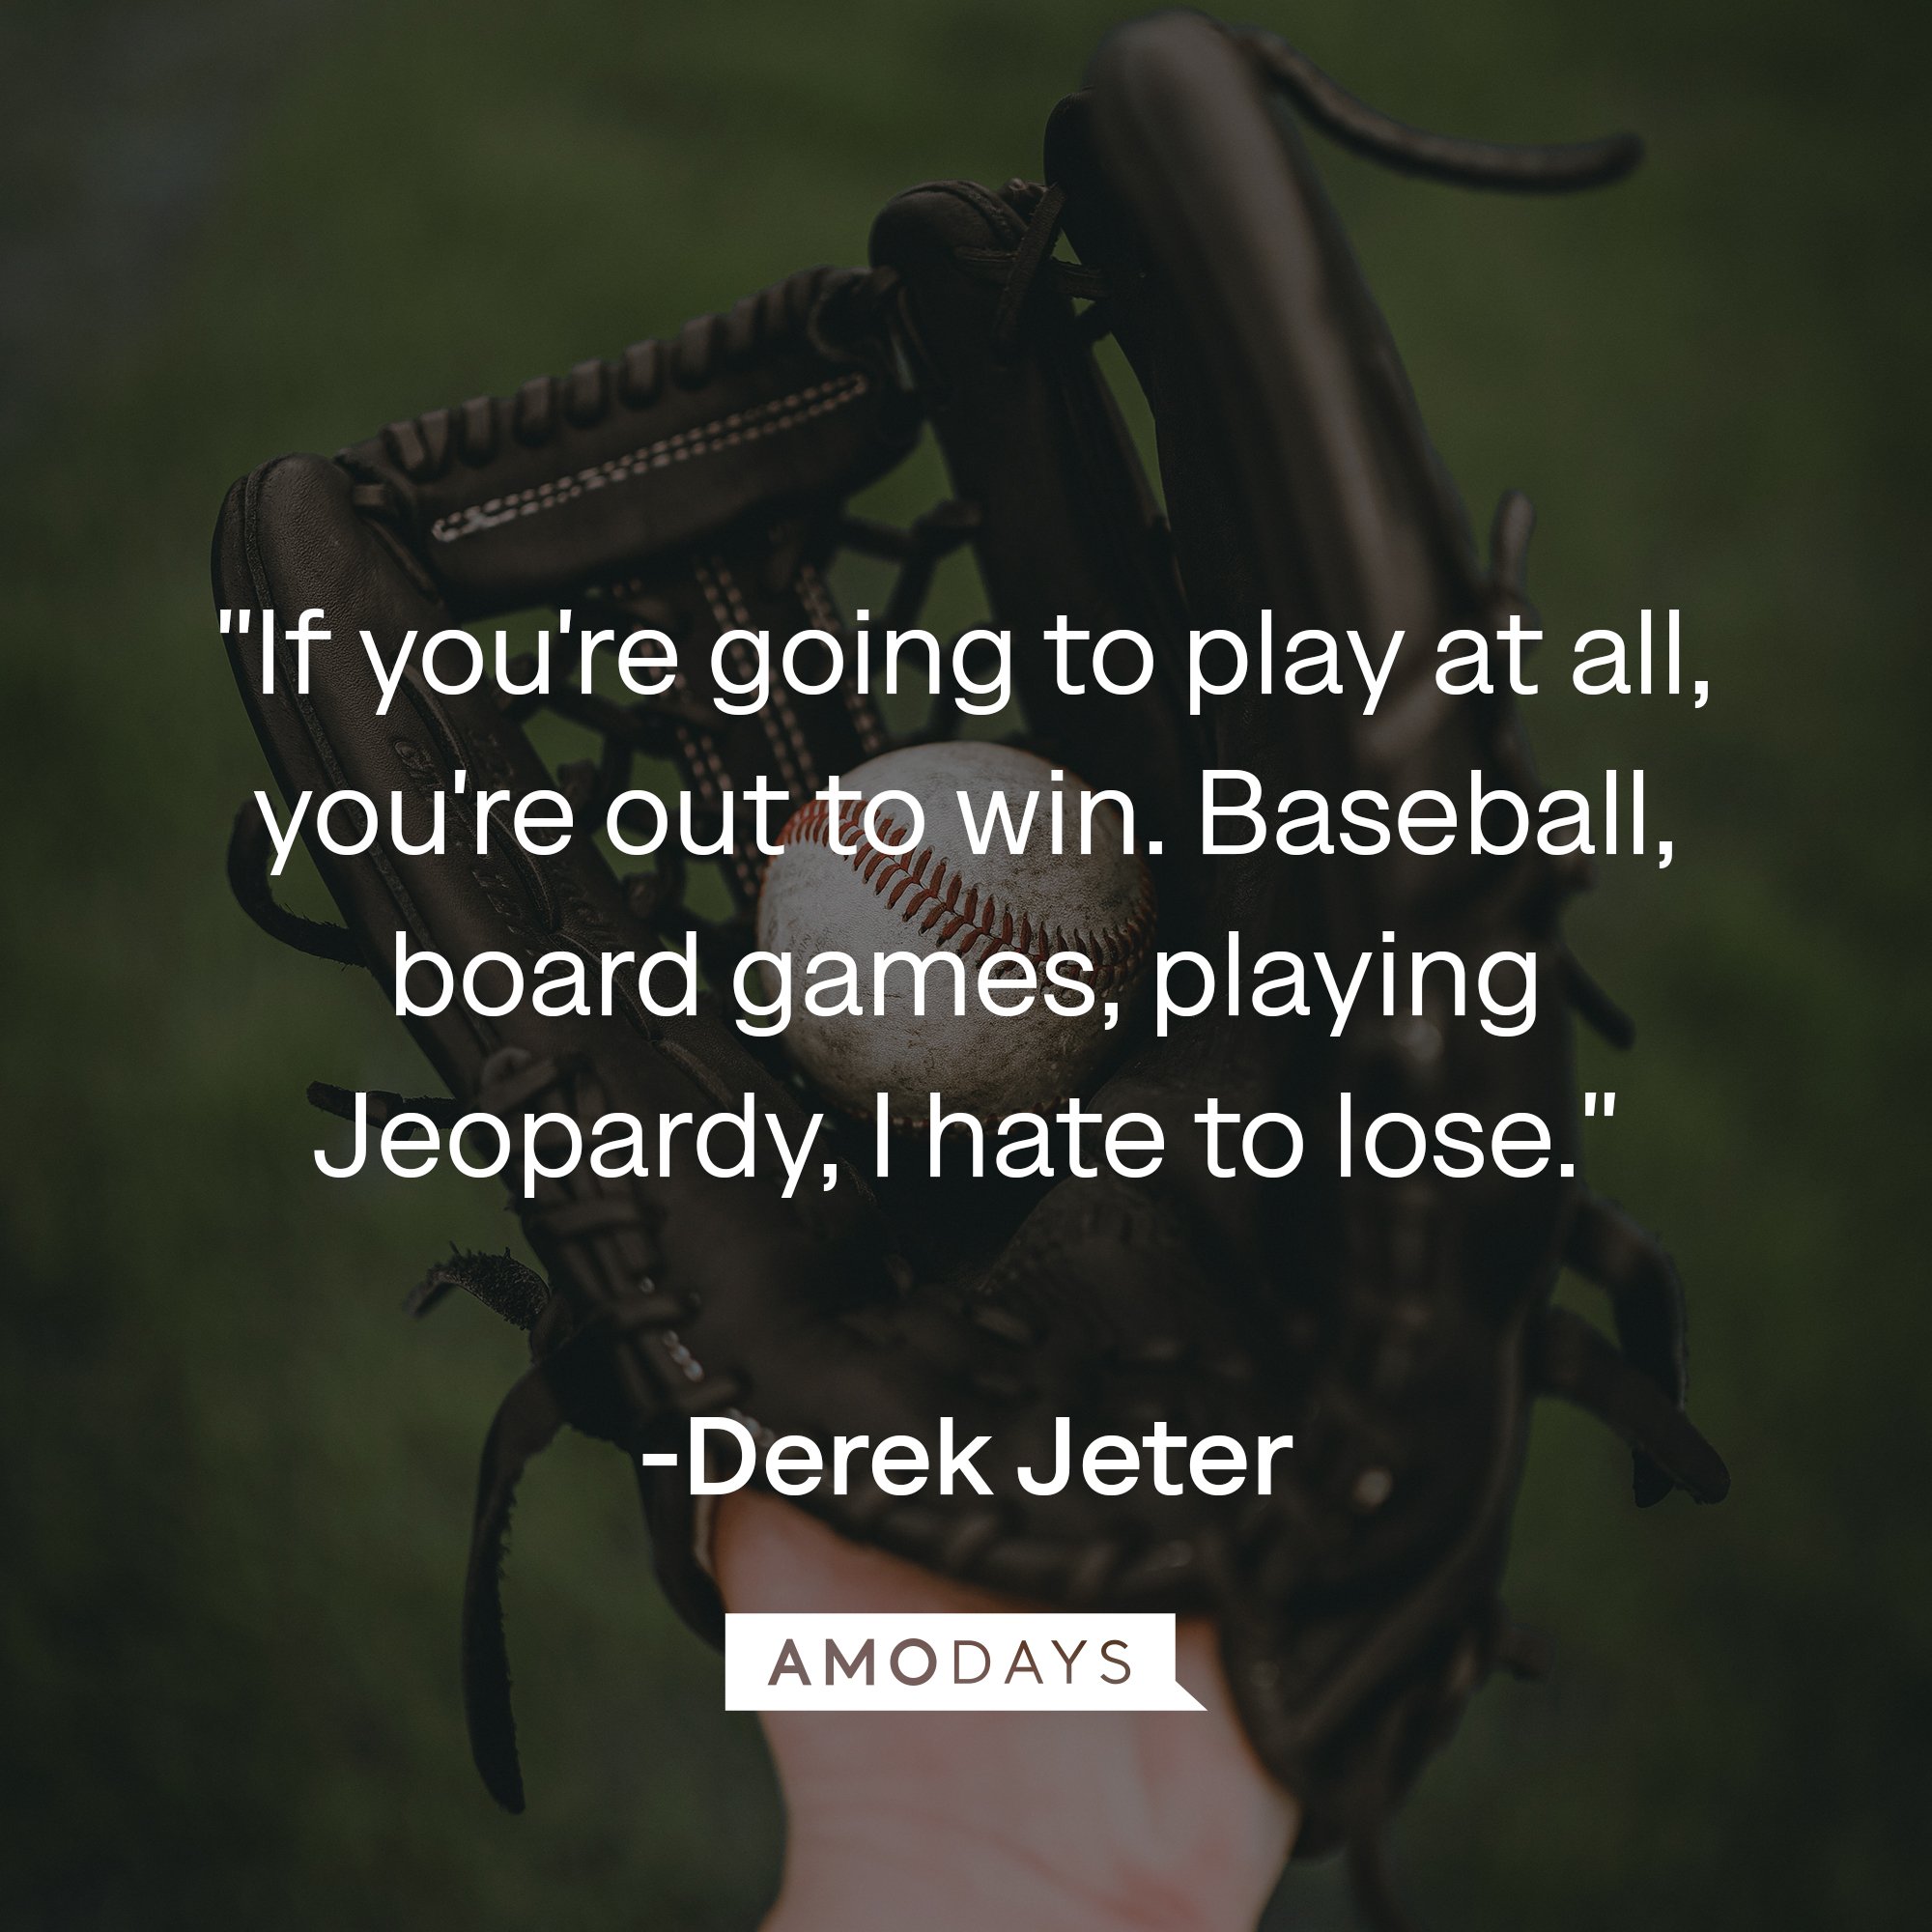 Derek Jeter's quote: "If you're going to play at all, you're out to win. Baseball, board games, playing Jeopardy, I hate to lose." | Image: AmoDays